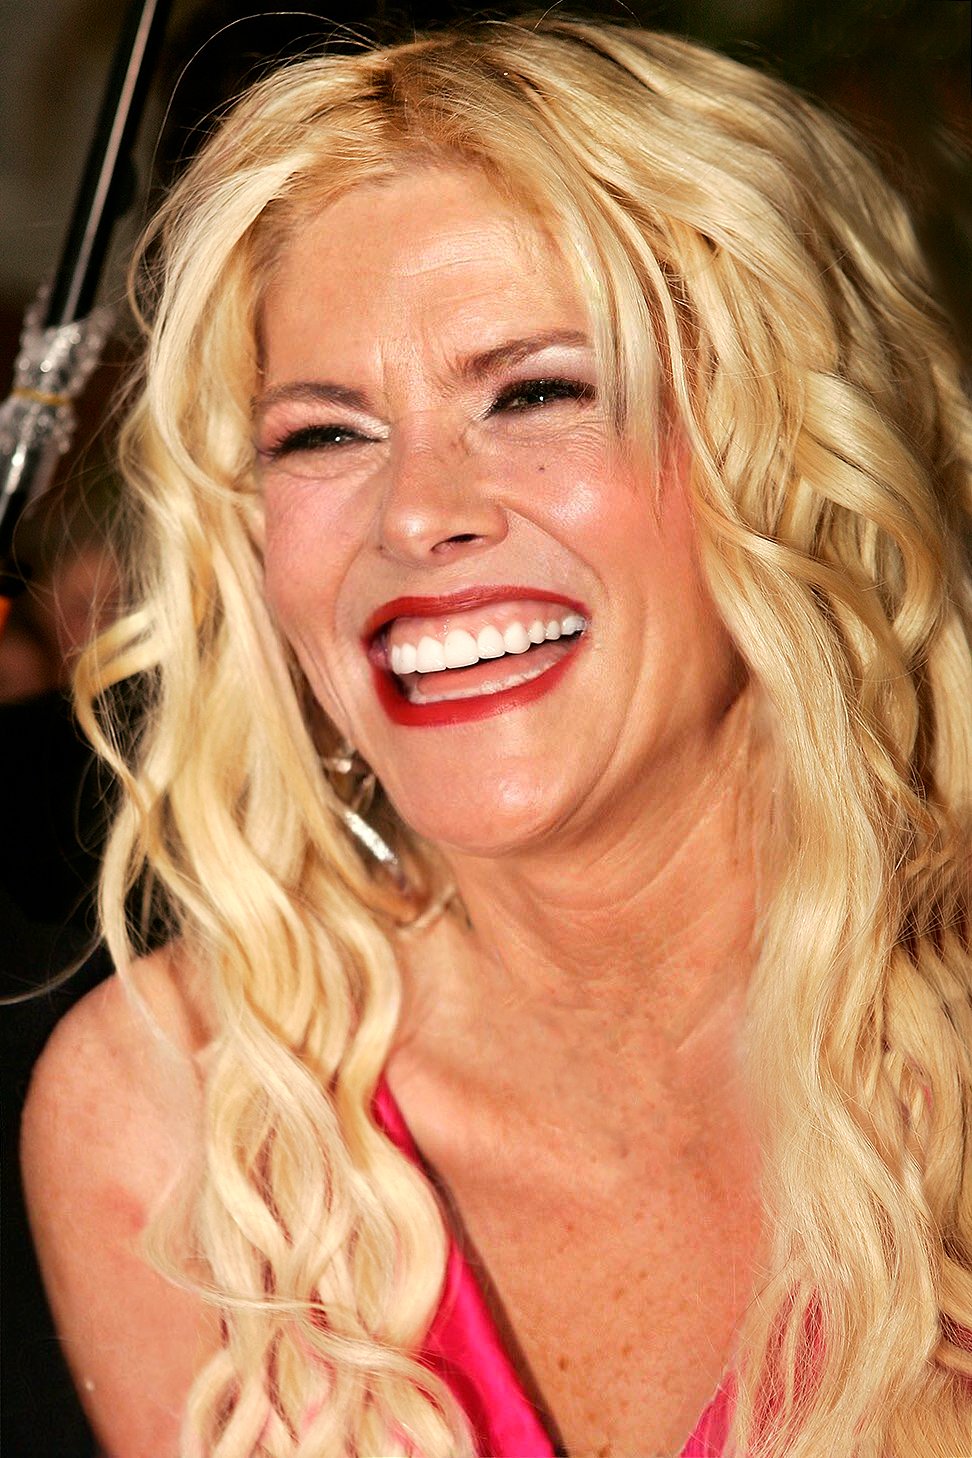 Anna Nicole Smith at 53 | Source: Getty Images